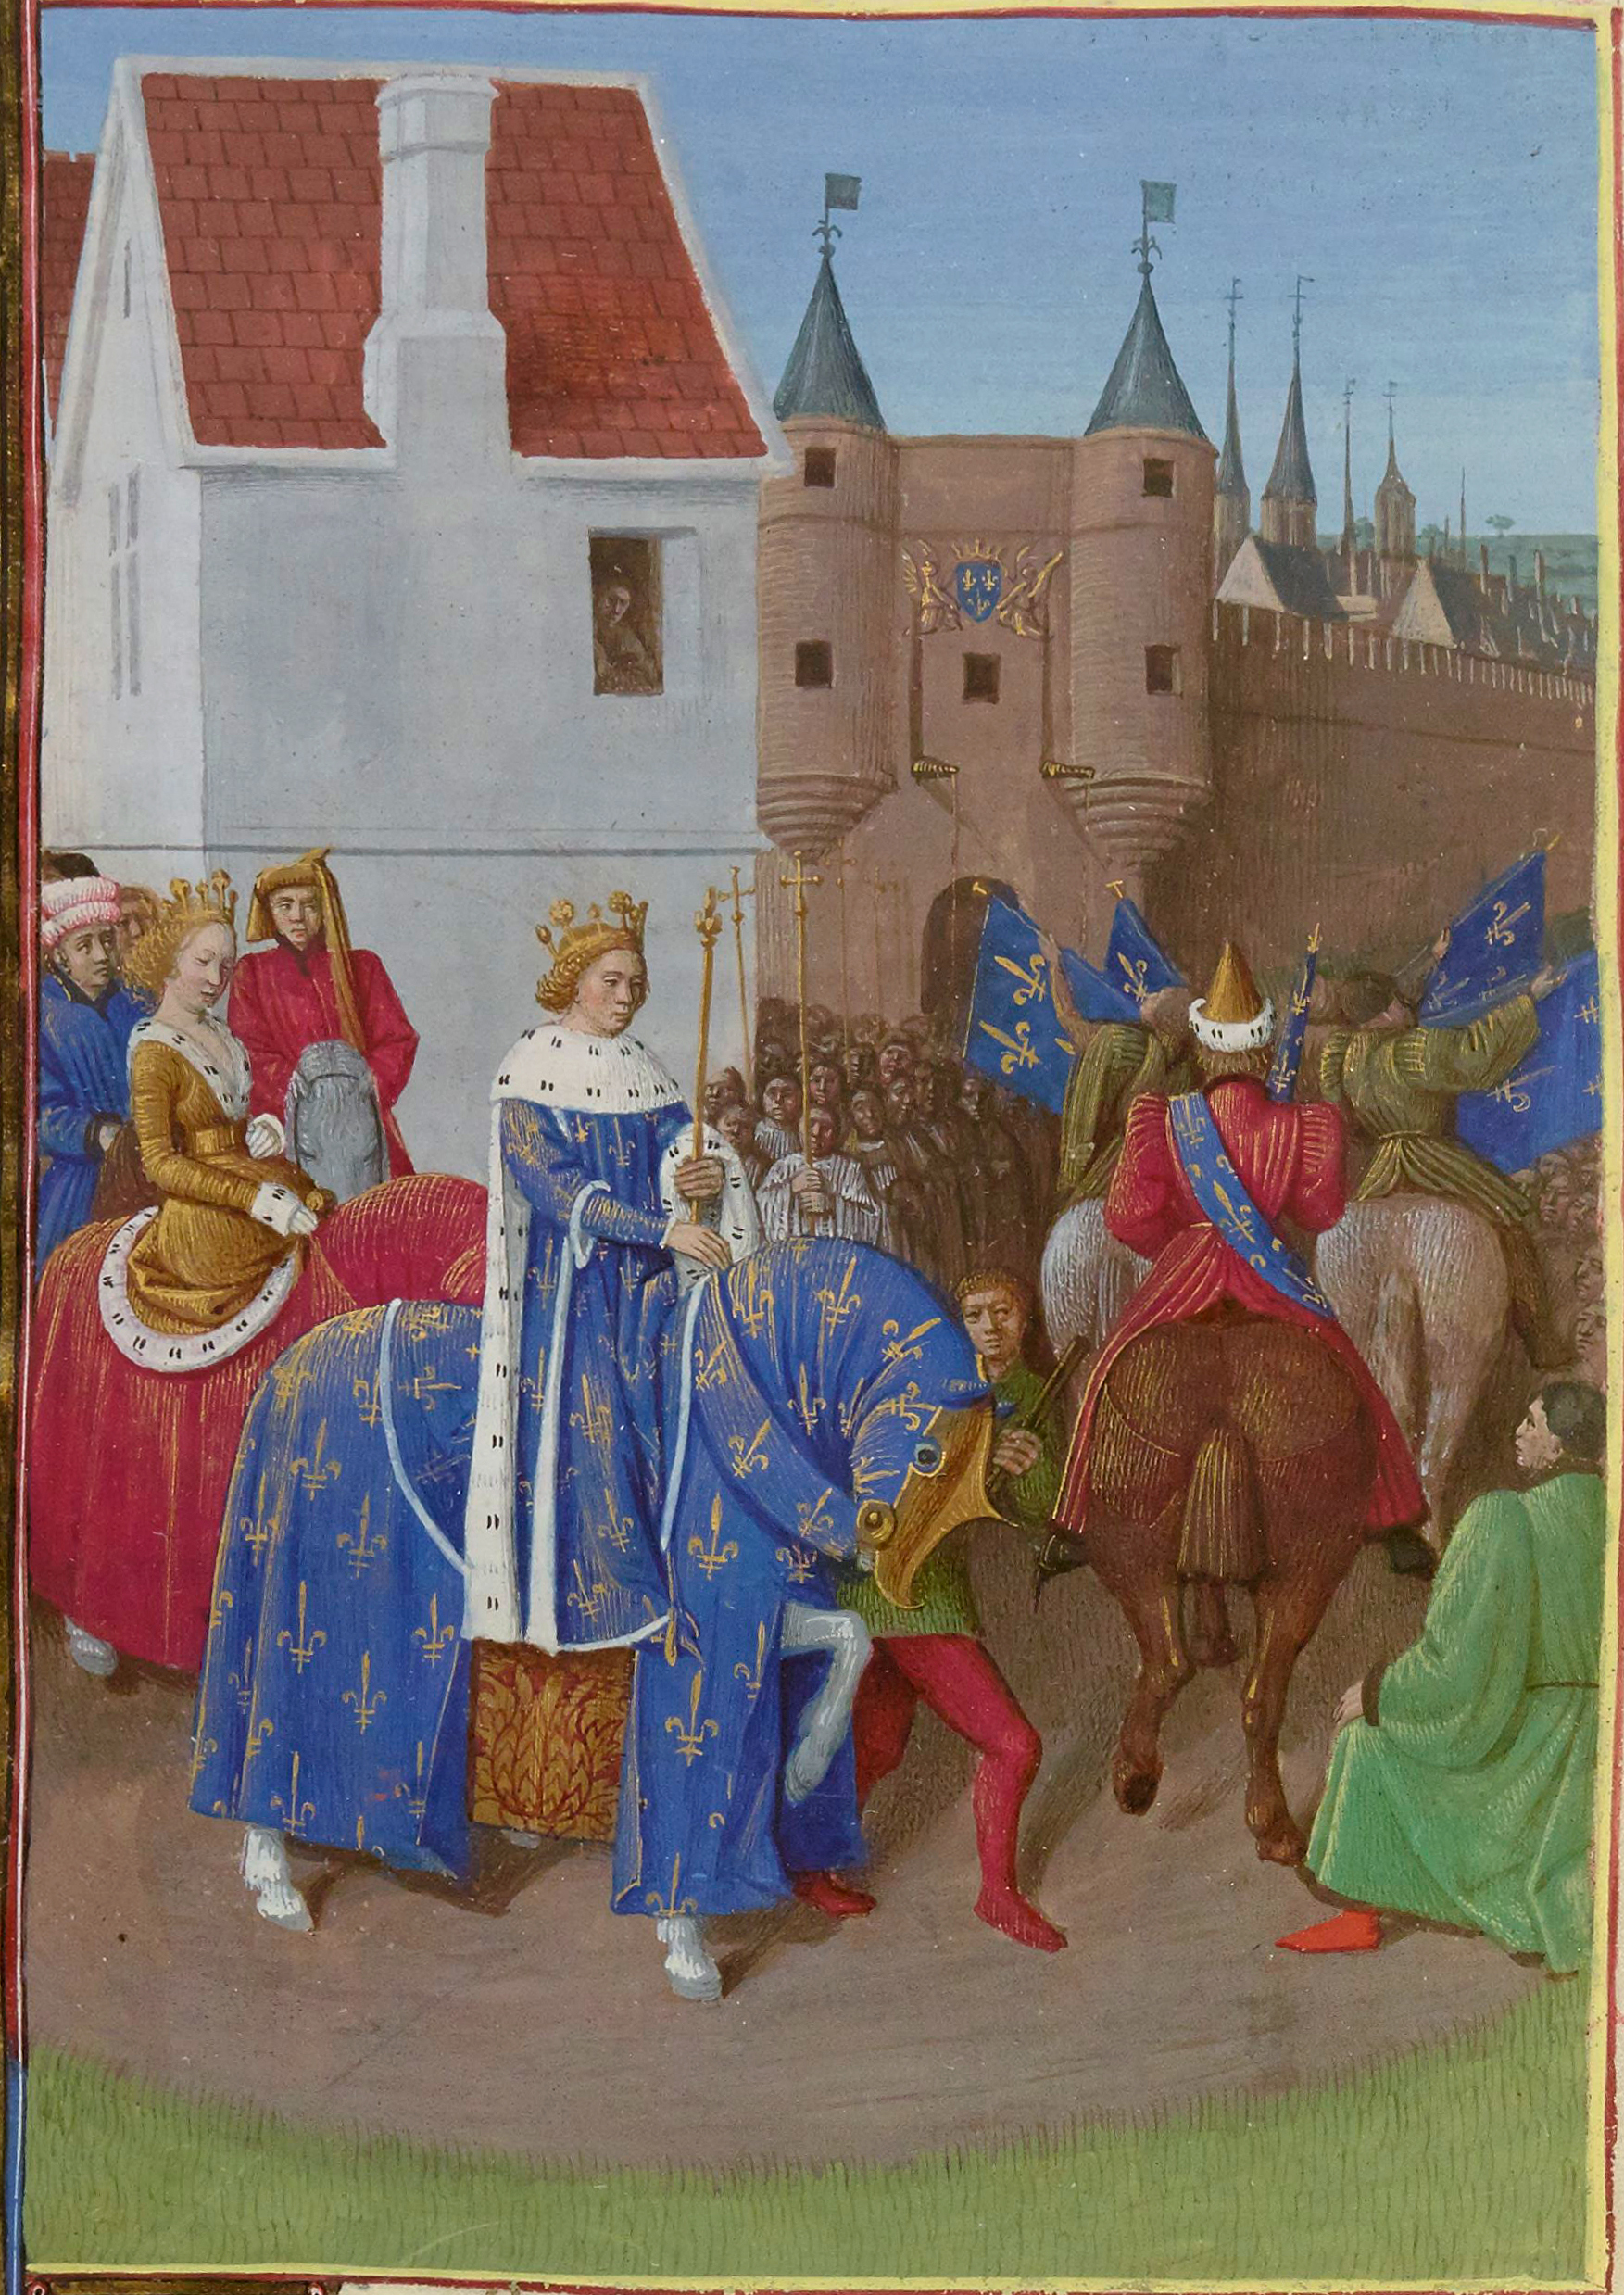 King Louis IX: Defining the Saintly Monarch's Reign